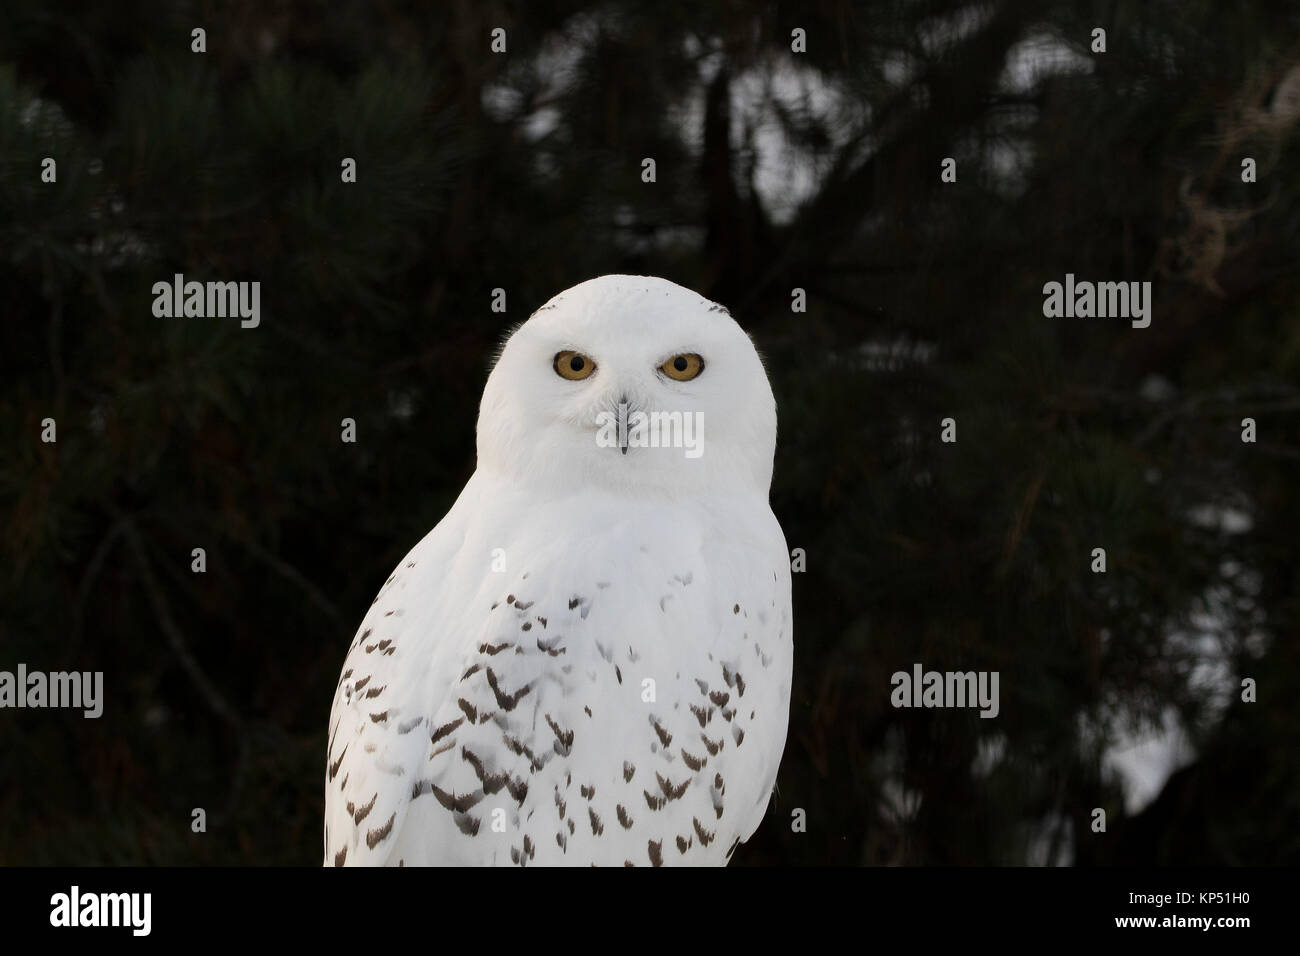 snowy owl, Bubo scandiacus, close up portrait of face and eye detail during winter in scotland. Stock Photo